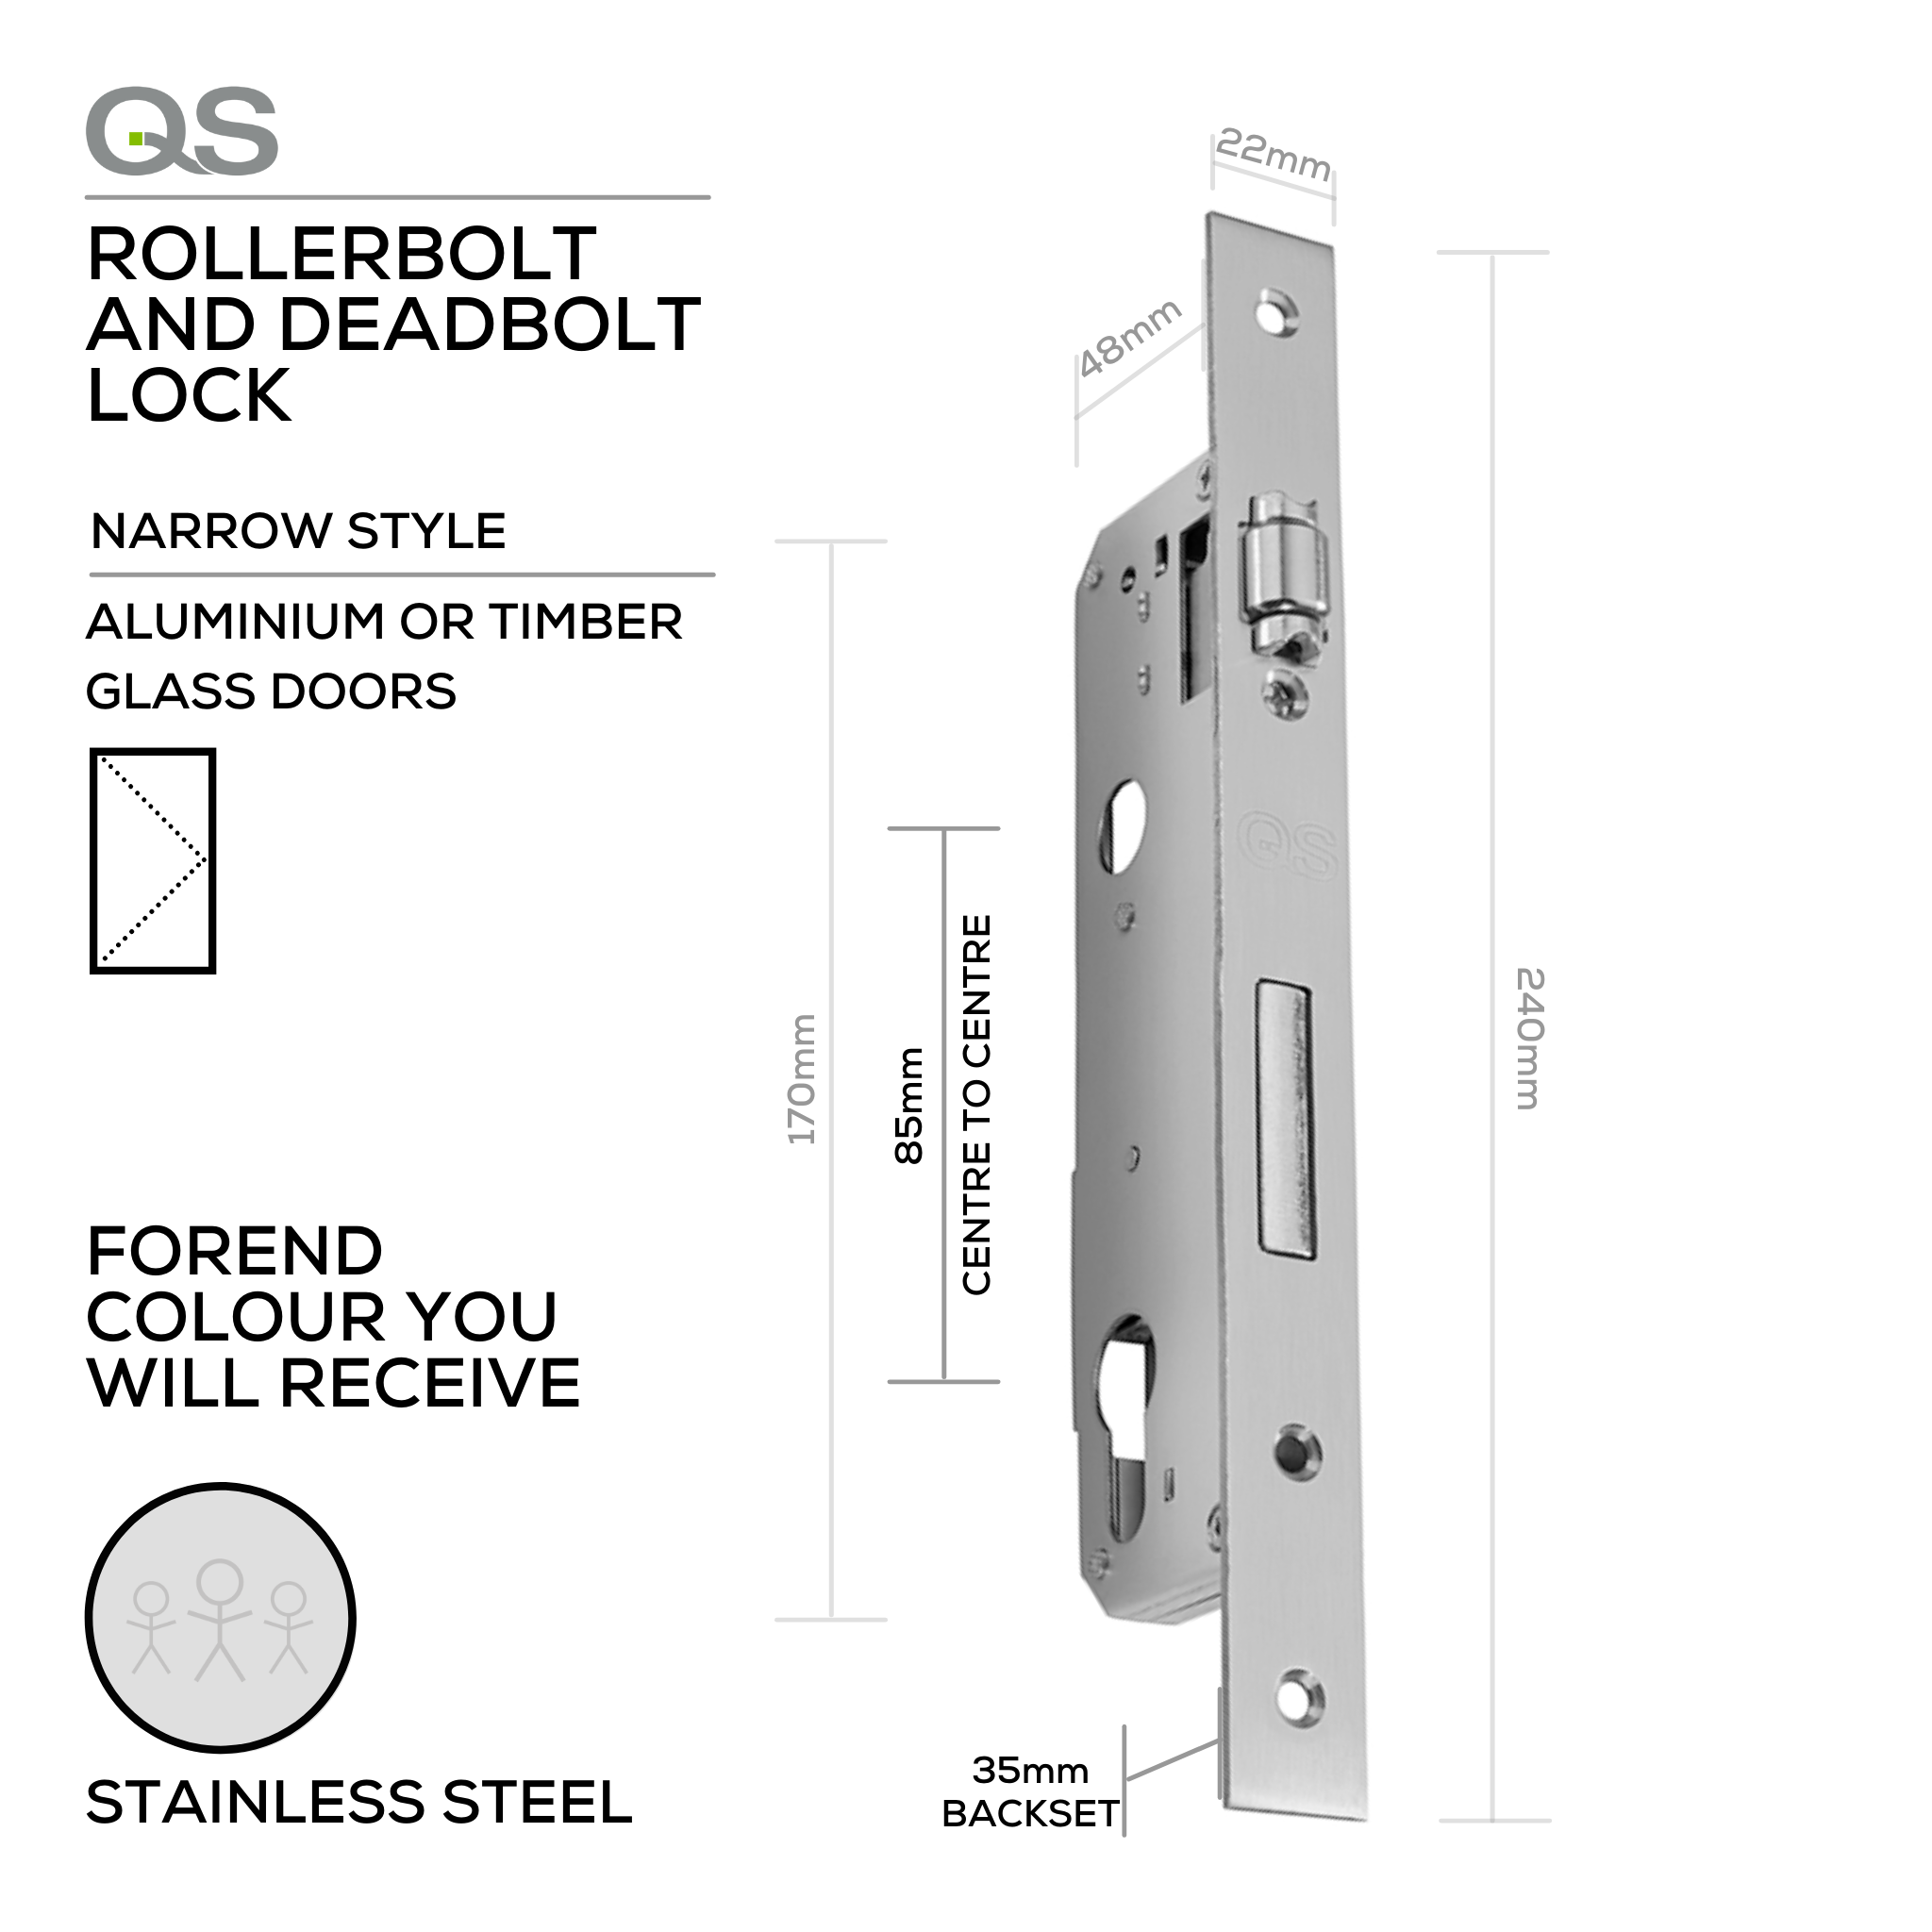 QS8535/3SS, Narrow Style, Rollerbolt Lock & Deadbolt, Euro Cylinder, Excluding Cylinder, 35mm (Backset), 85mm (ctc), Stainless Steel, QS